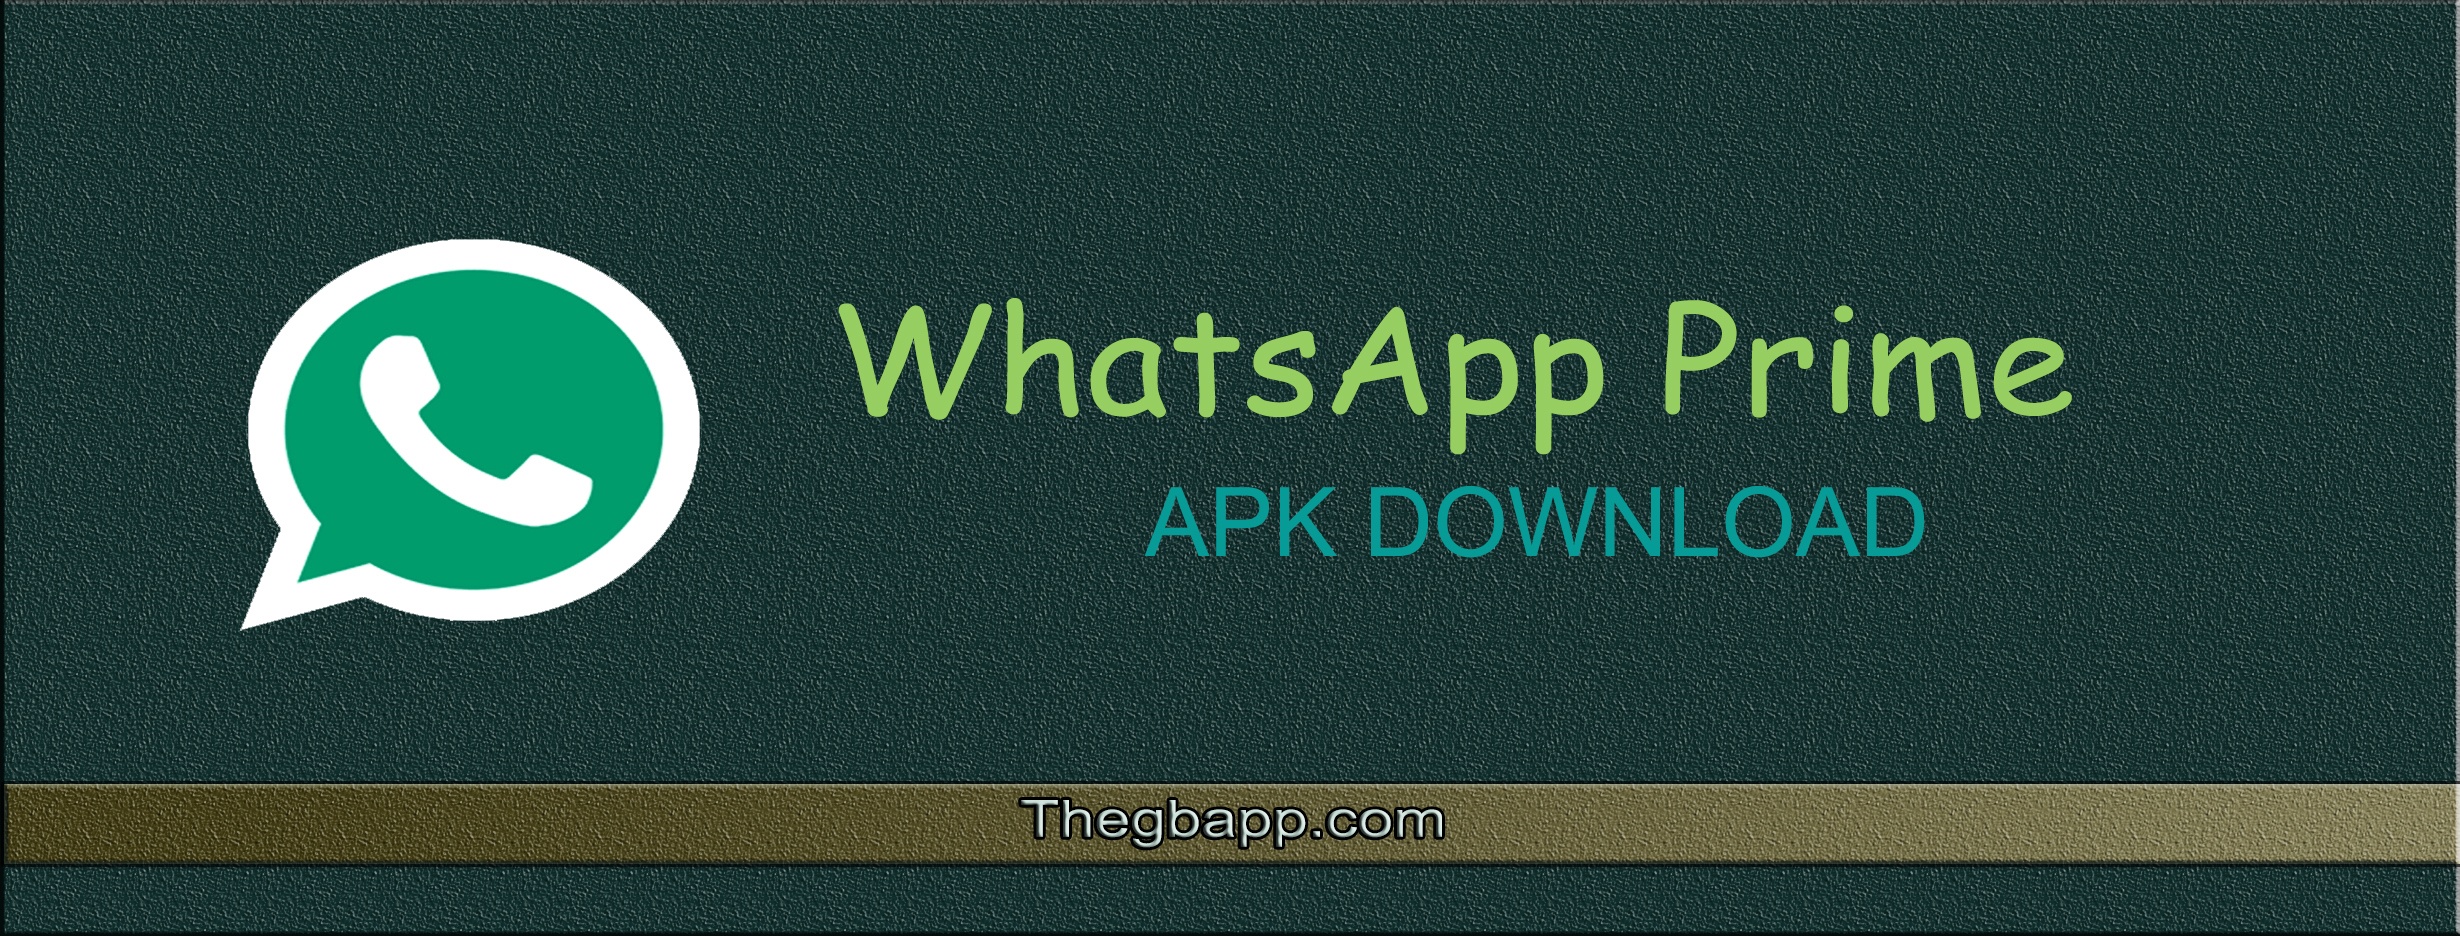 WhatsApp Prime 1.2.10 Latest Version Download - TheGBApps